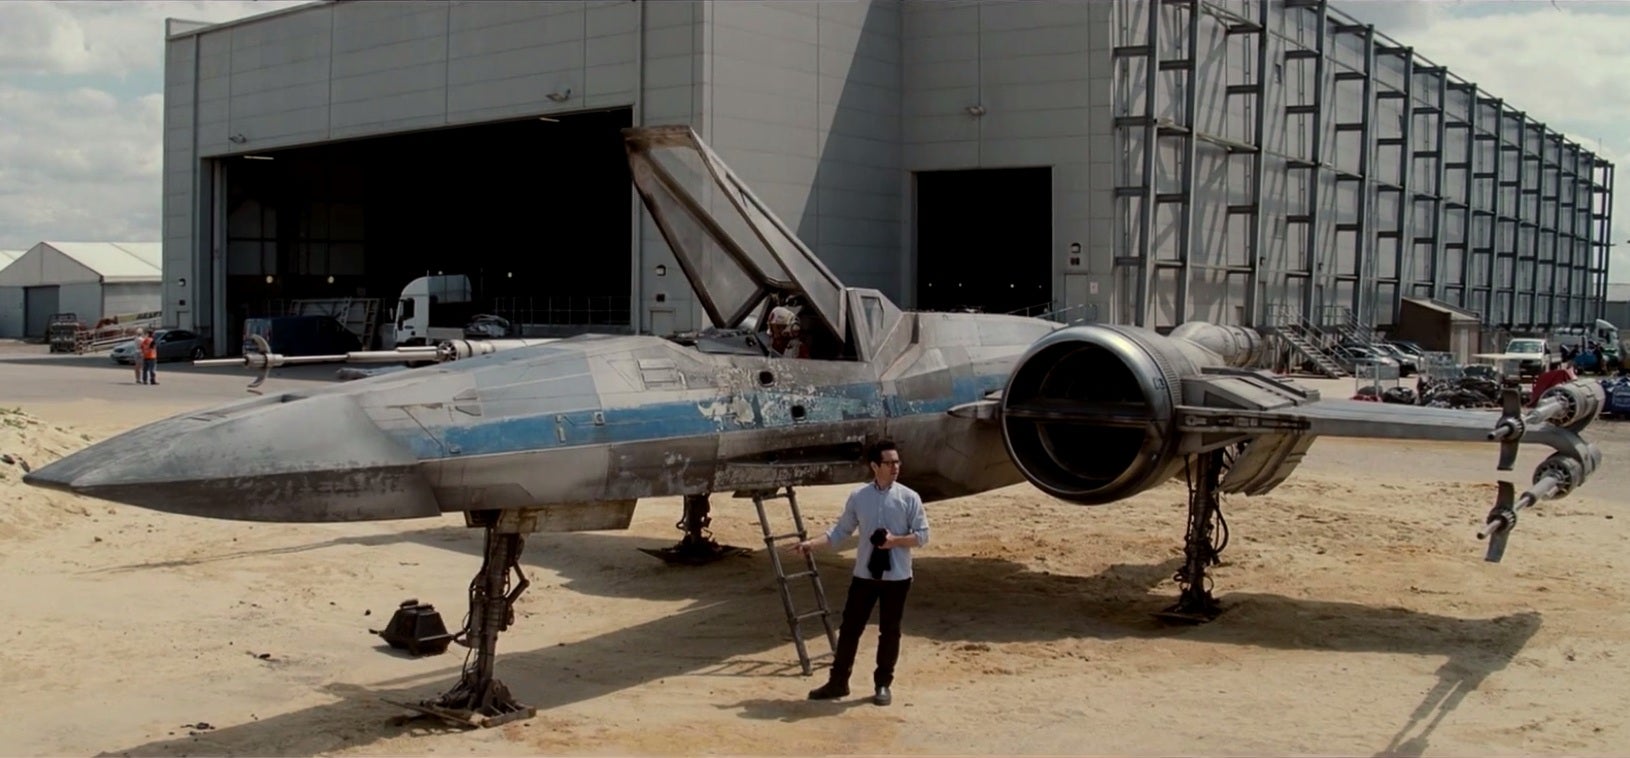 JJ Abrams shows off the new X-Wing